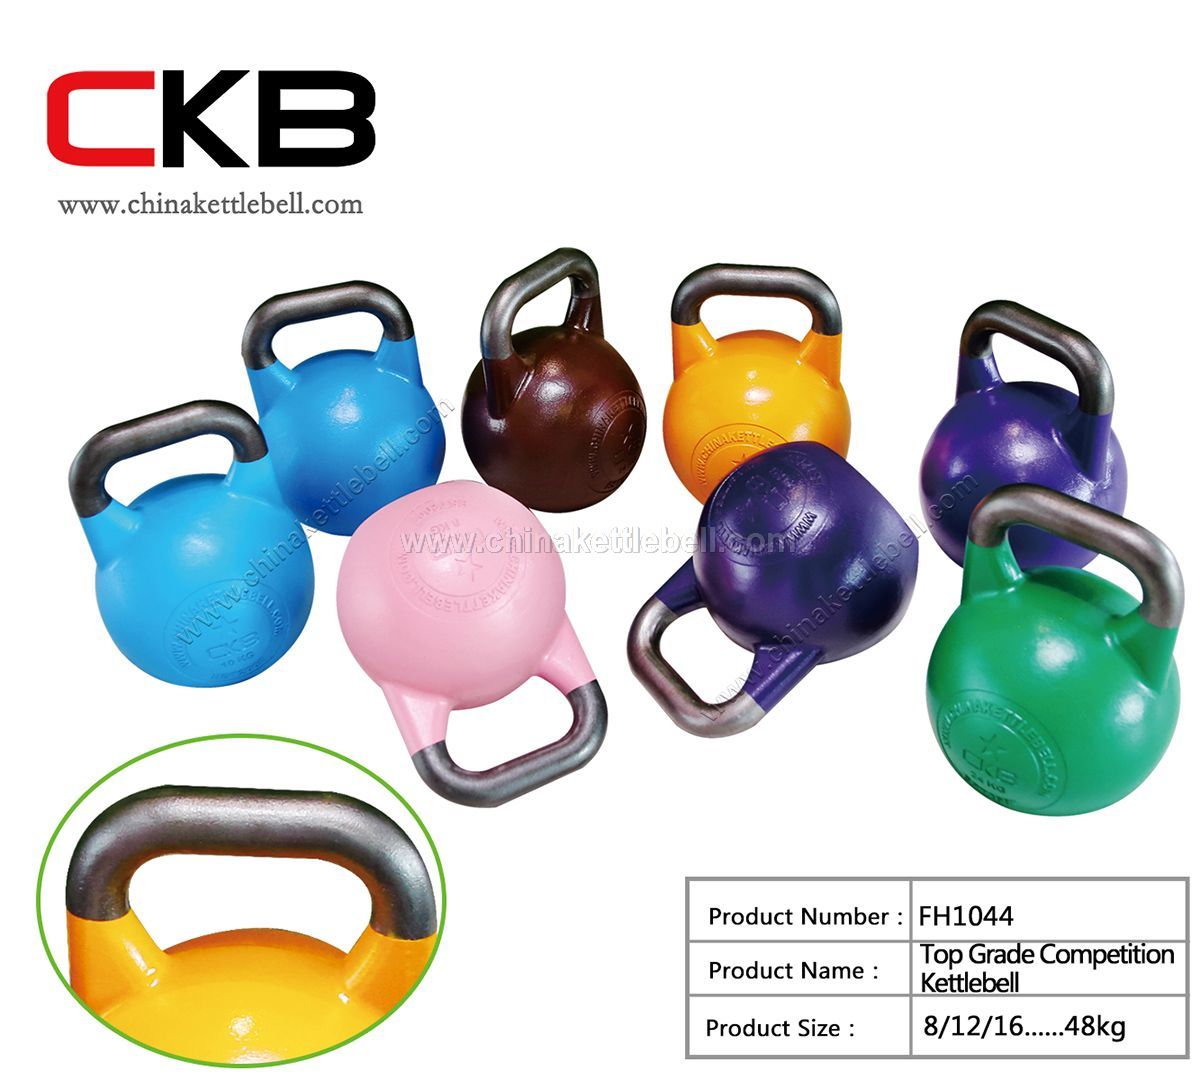 Top grade Competition kettlebell